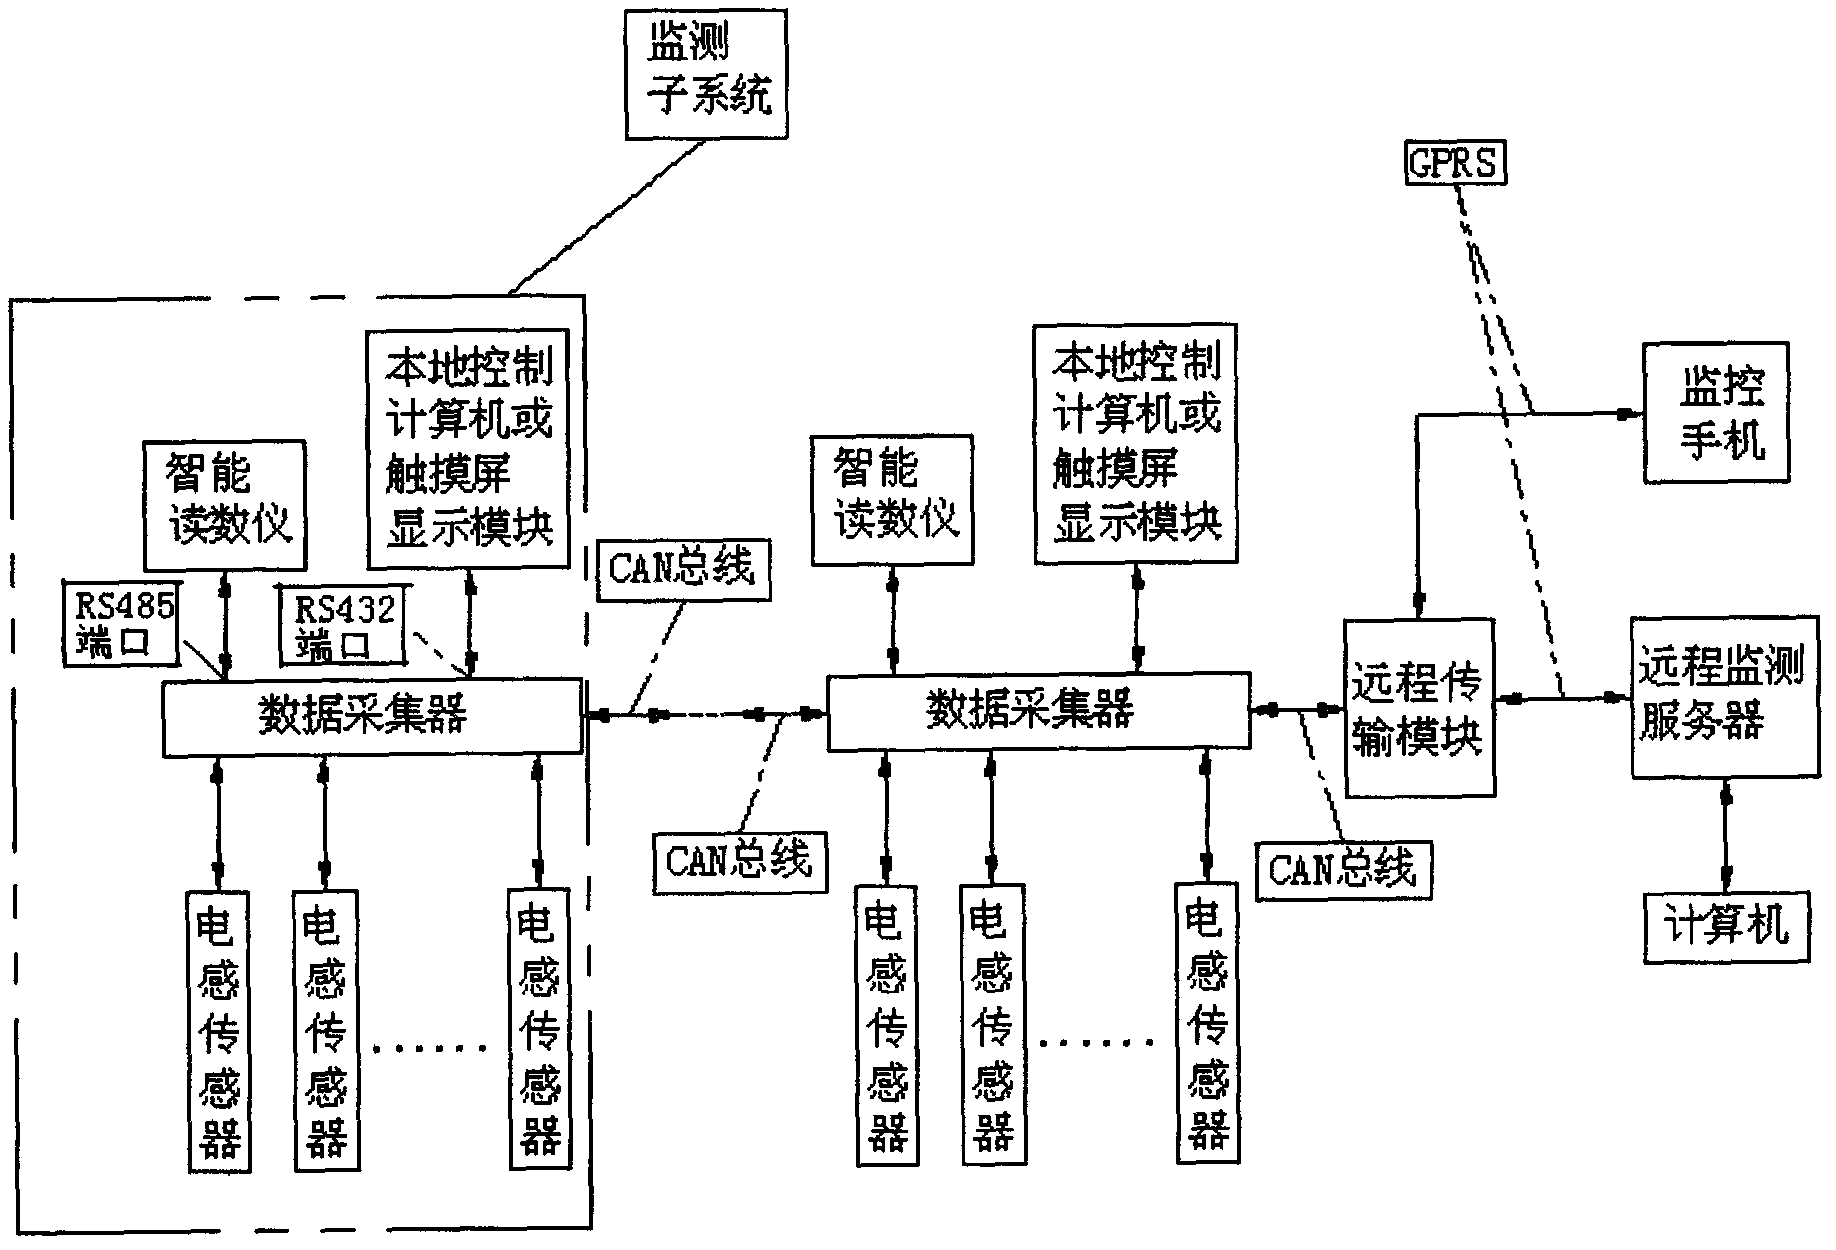 Controller area network (CAN) bus-based settlement deformation monitoring system